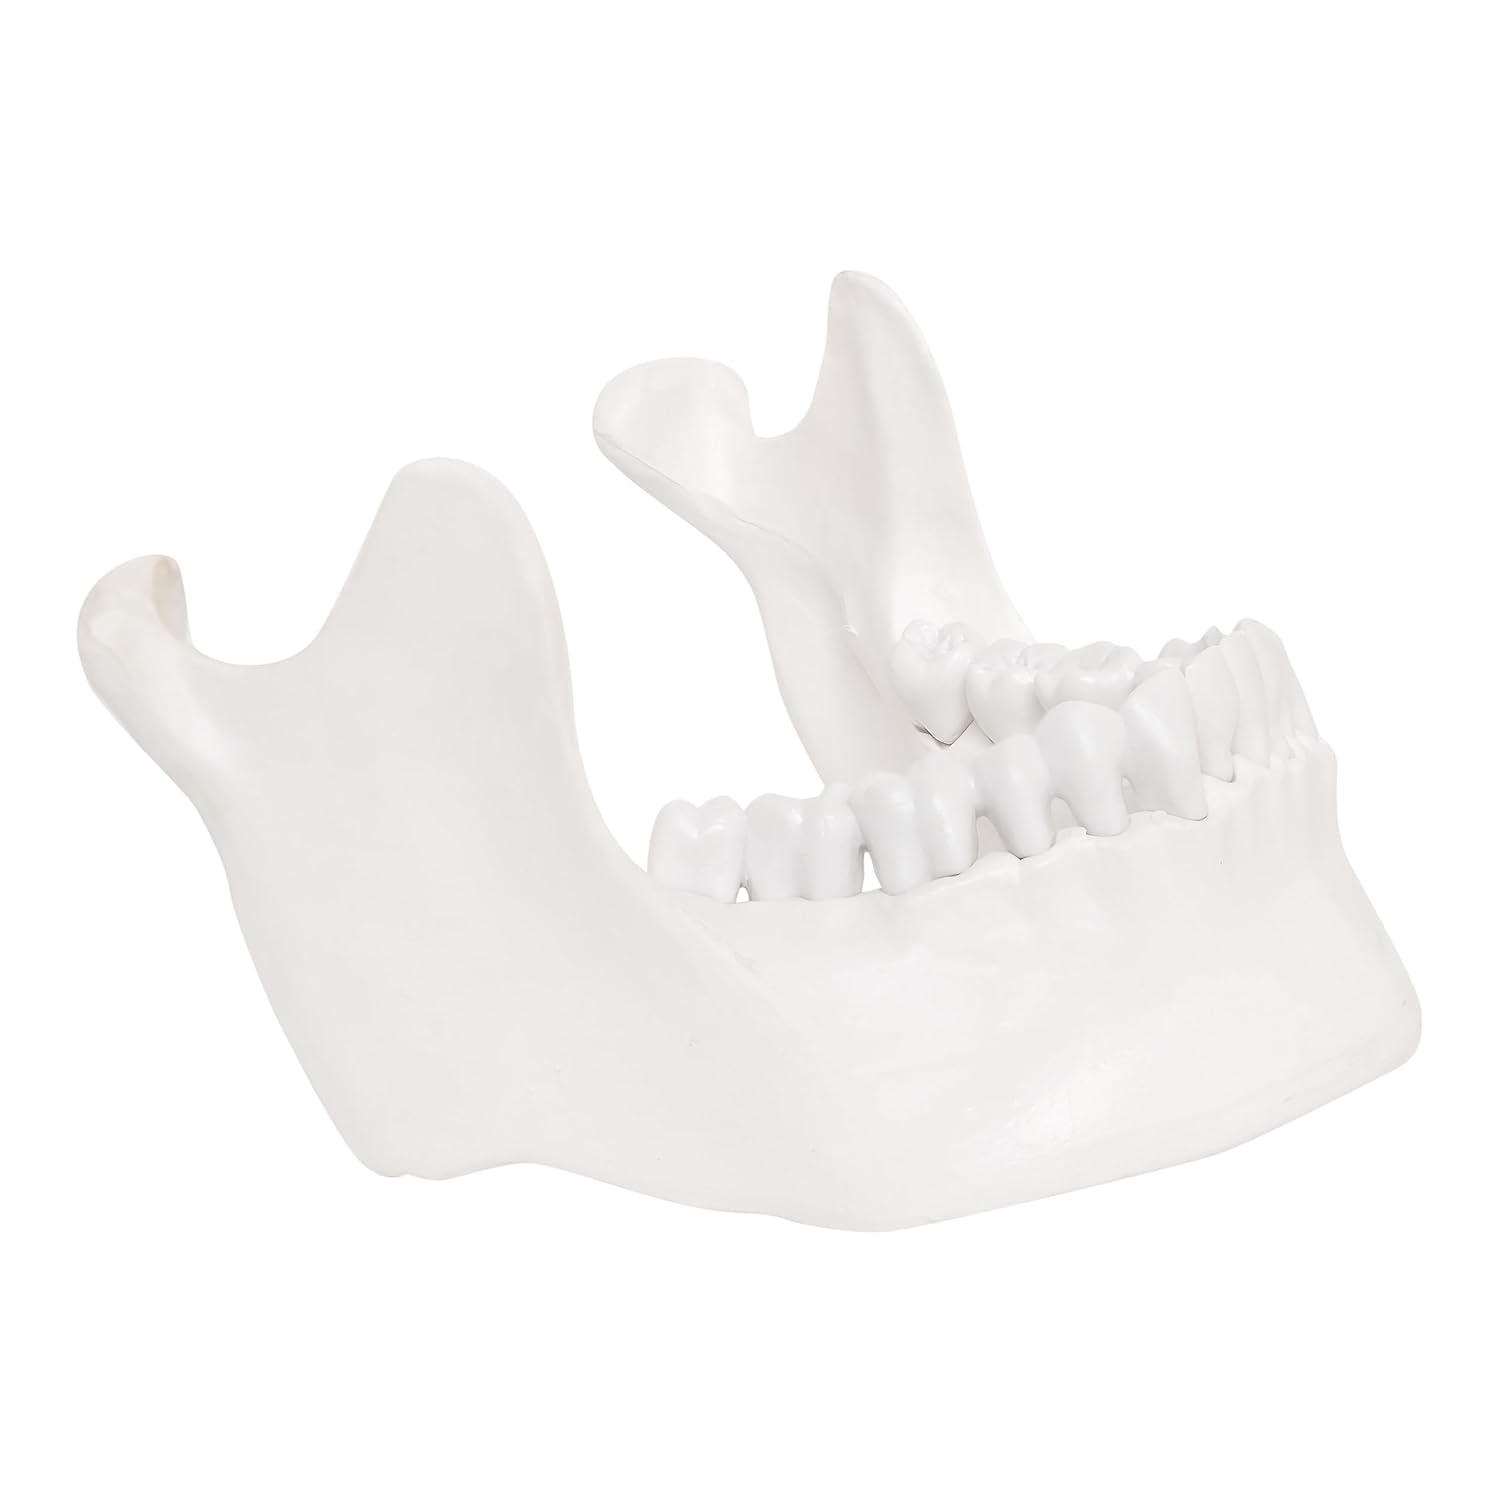 LABZIO - Lower Jaw 3D Model Anatomically Accurate - Dental Study Tool for Education and Practice